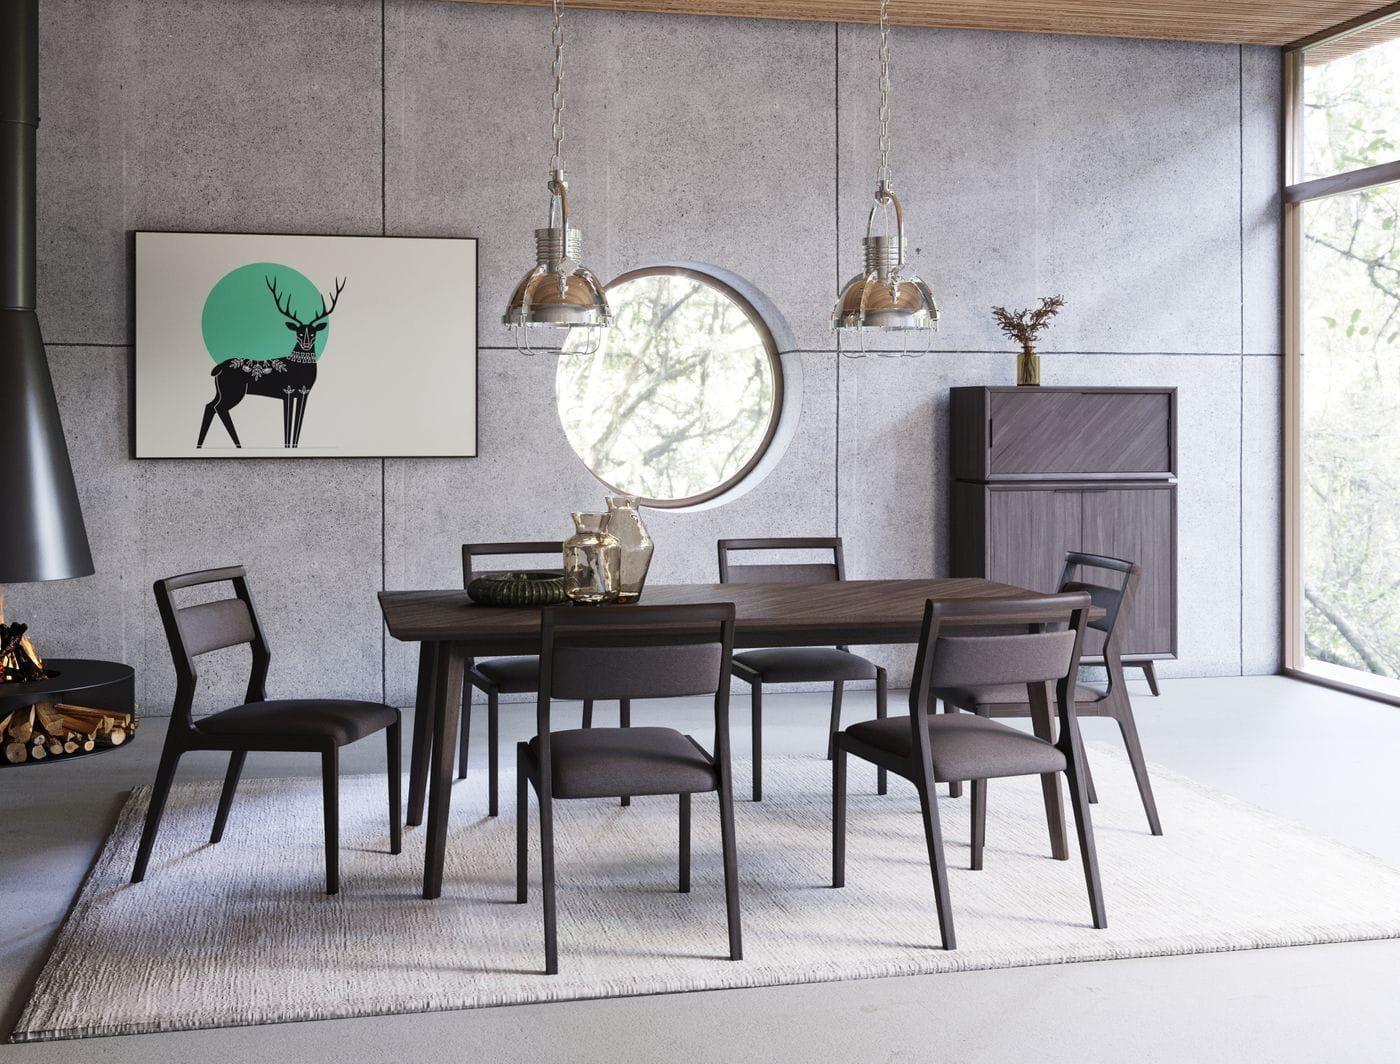 Contemporary, Modern Dining Room Set VGMABR-99-CHEST VGWDSTHLDT210-BRN-DT-8pcs in Brown 